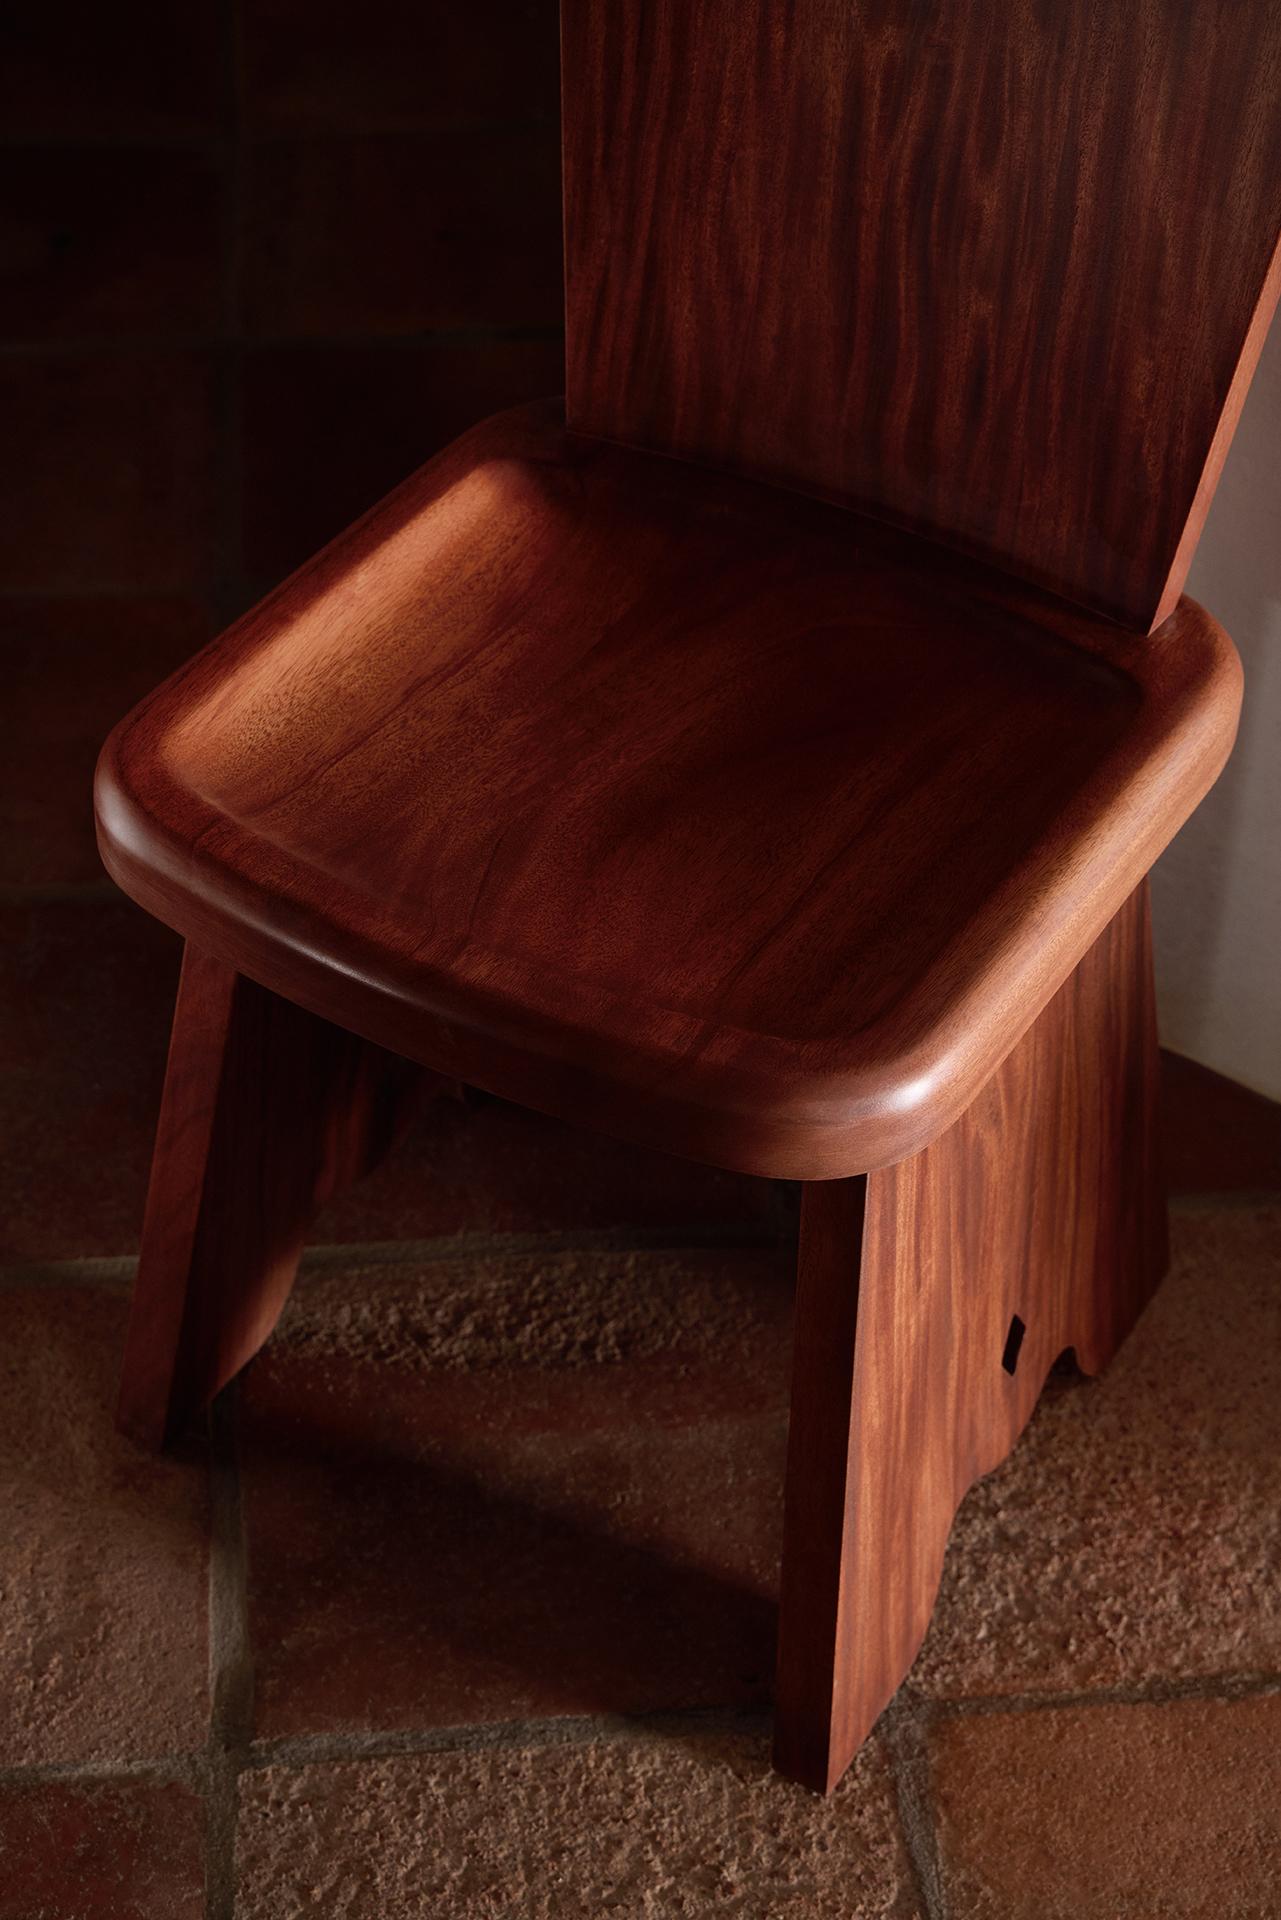 Rambling Chair in African Mahogany Wood by Yaniv Chen for Lemon For Sale 3